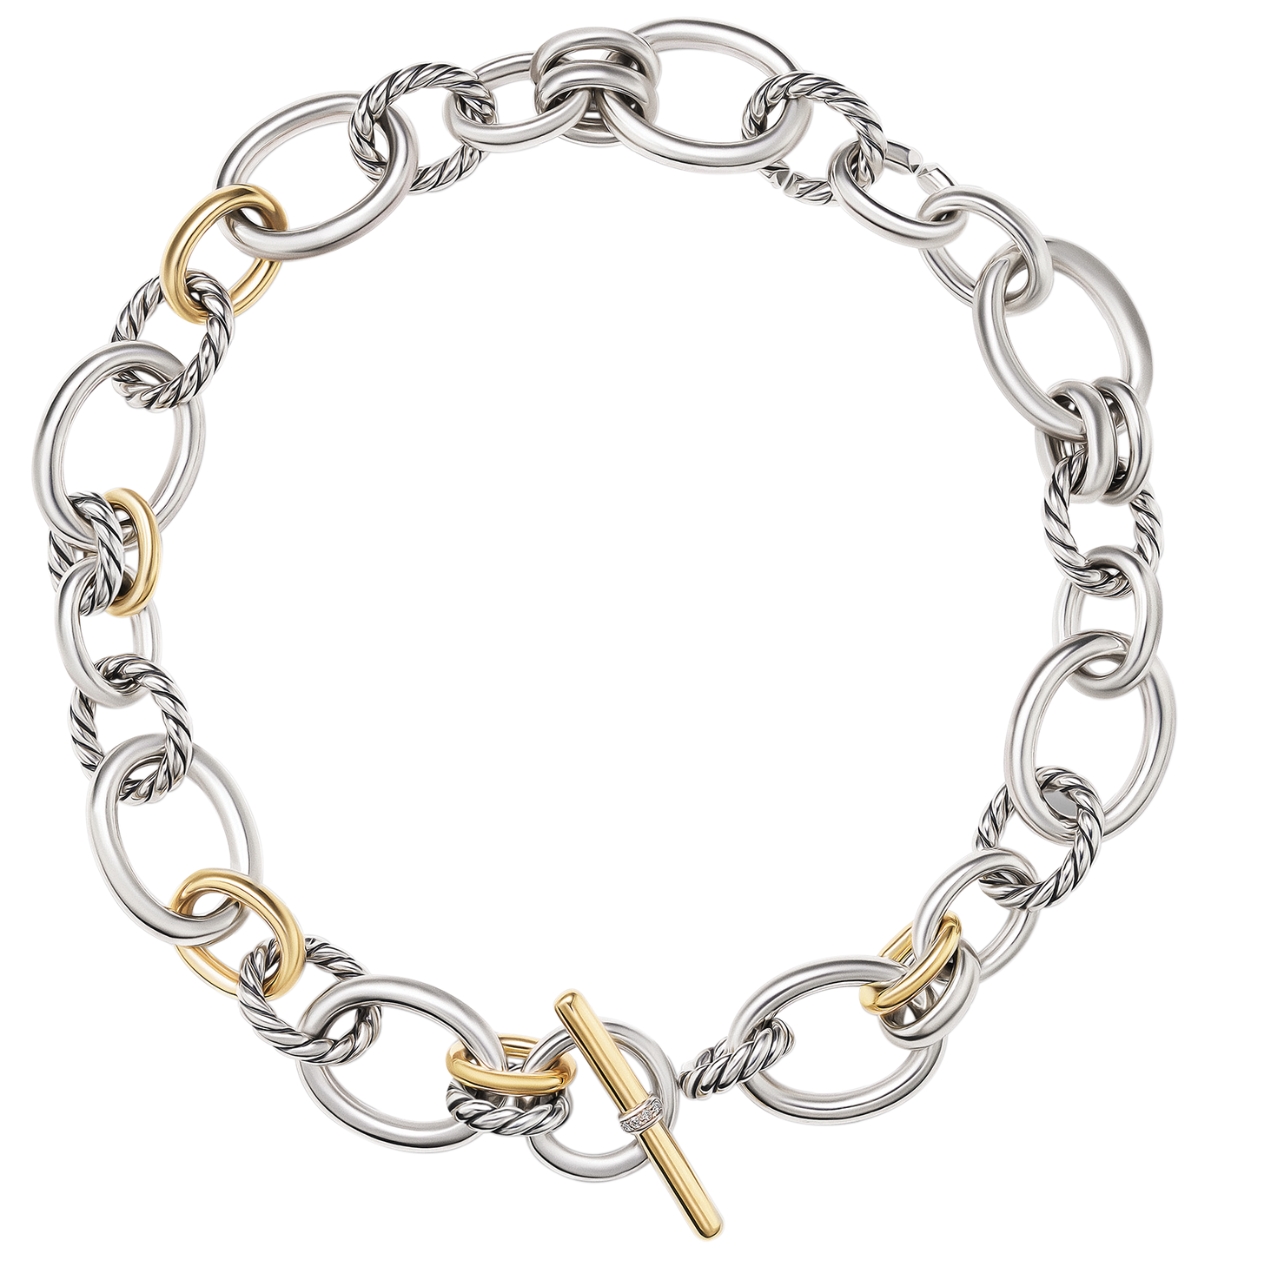 David Yurman chain necklace in silver and yellow gold with diamond clasp